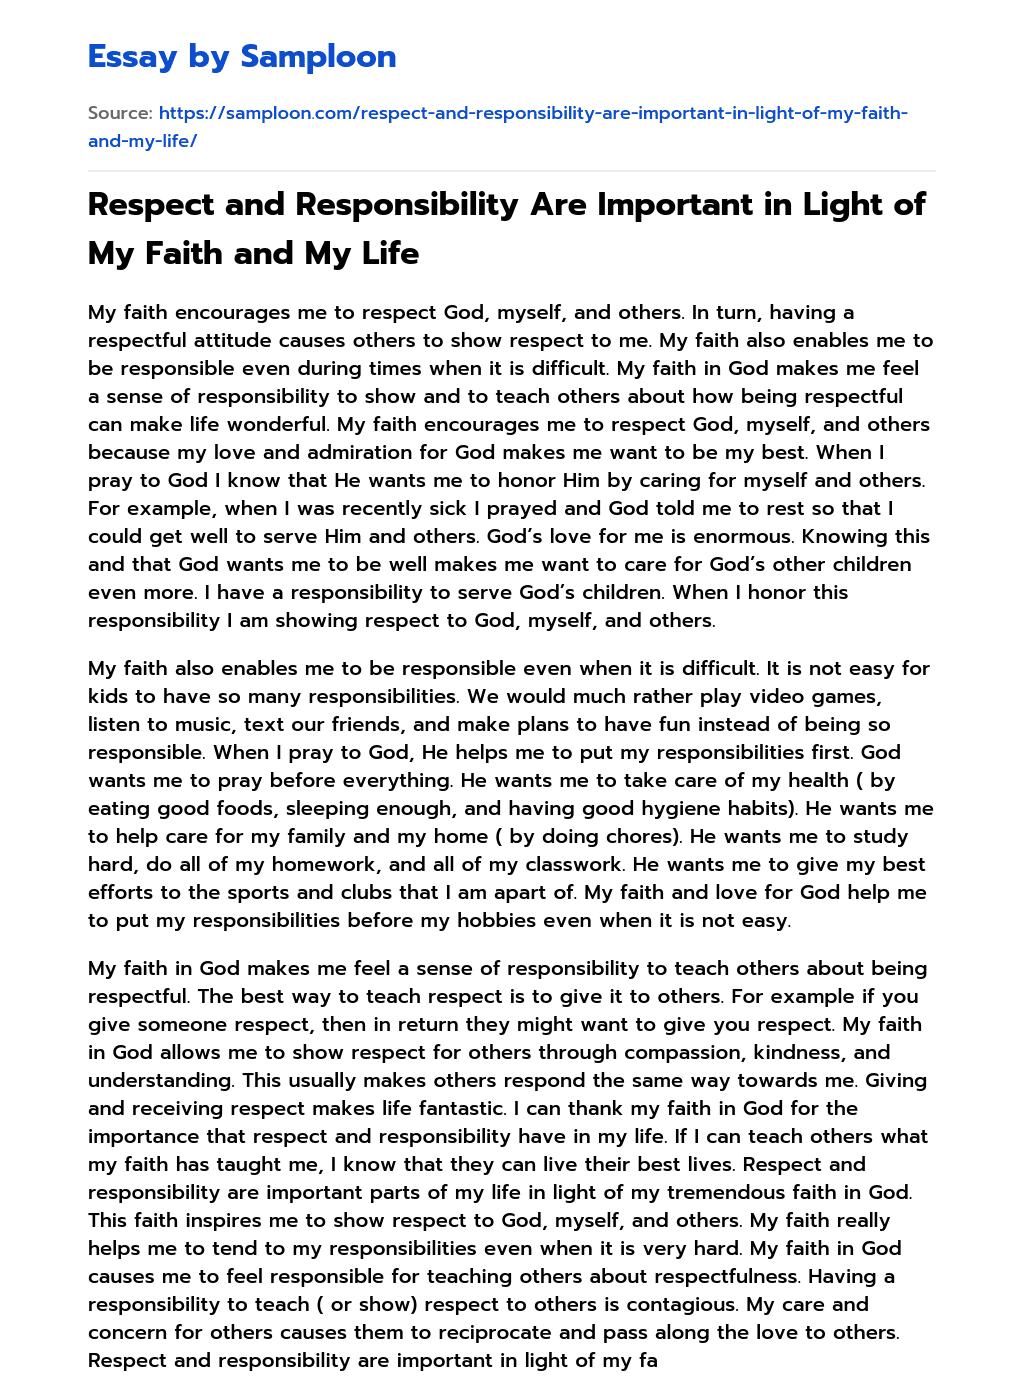 Respect and Responsibility Are Important in Light of My Faith and My Life essay